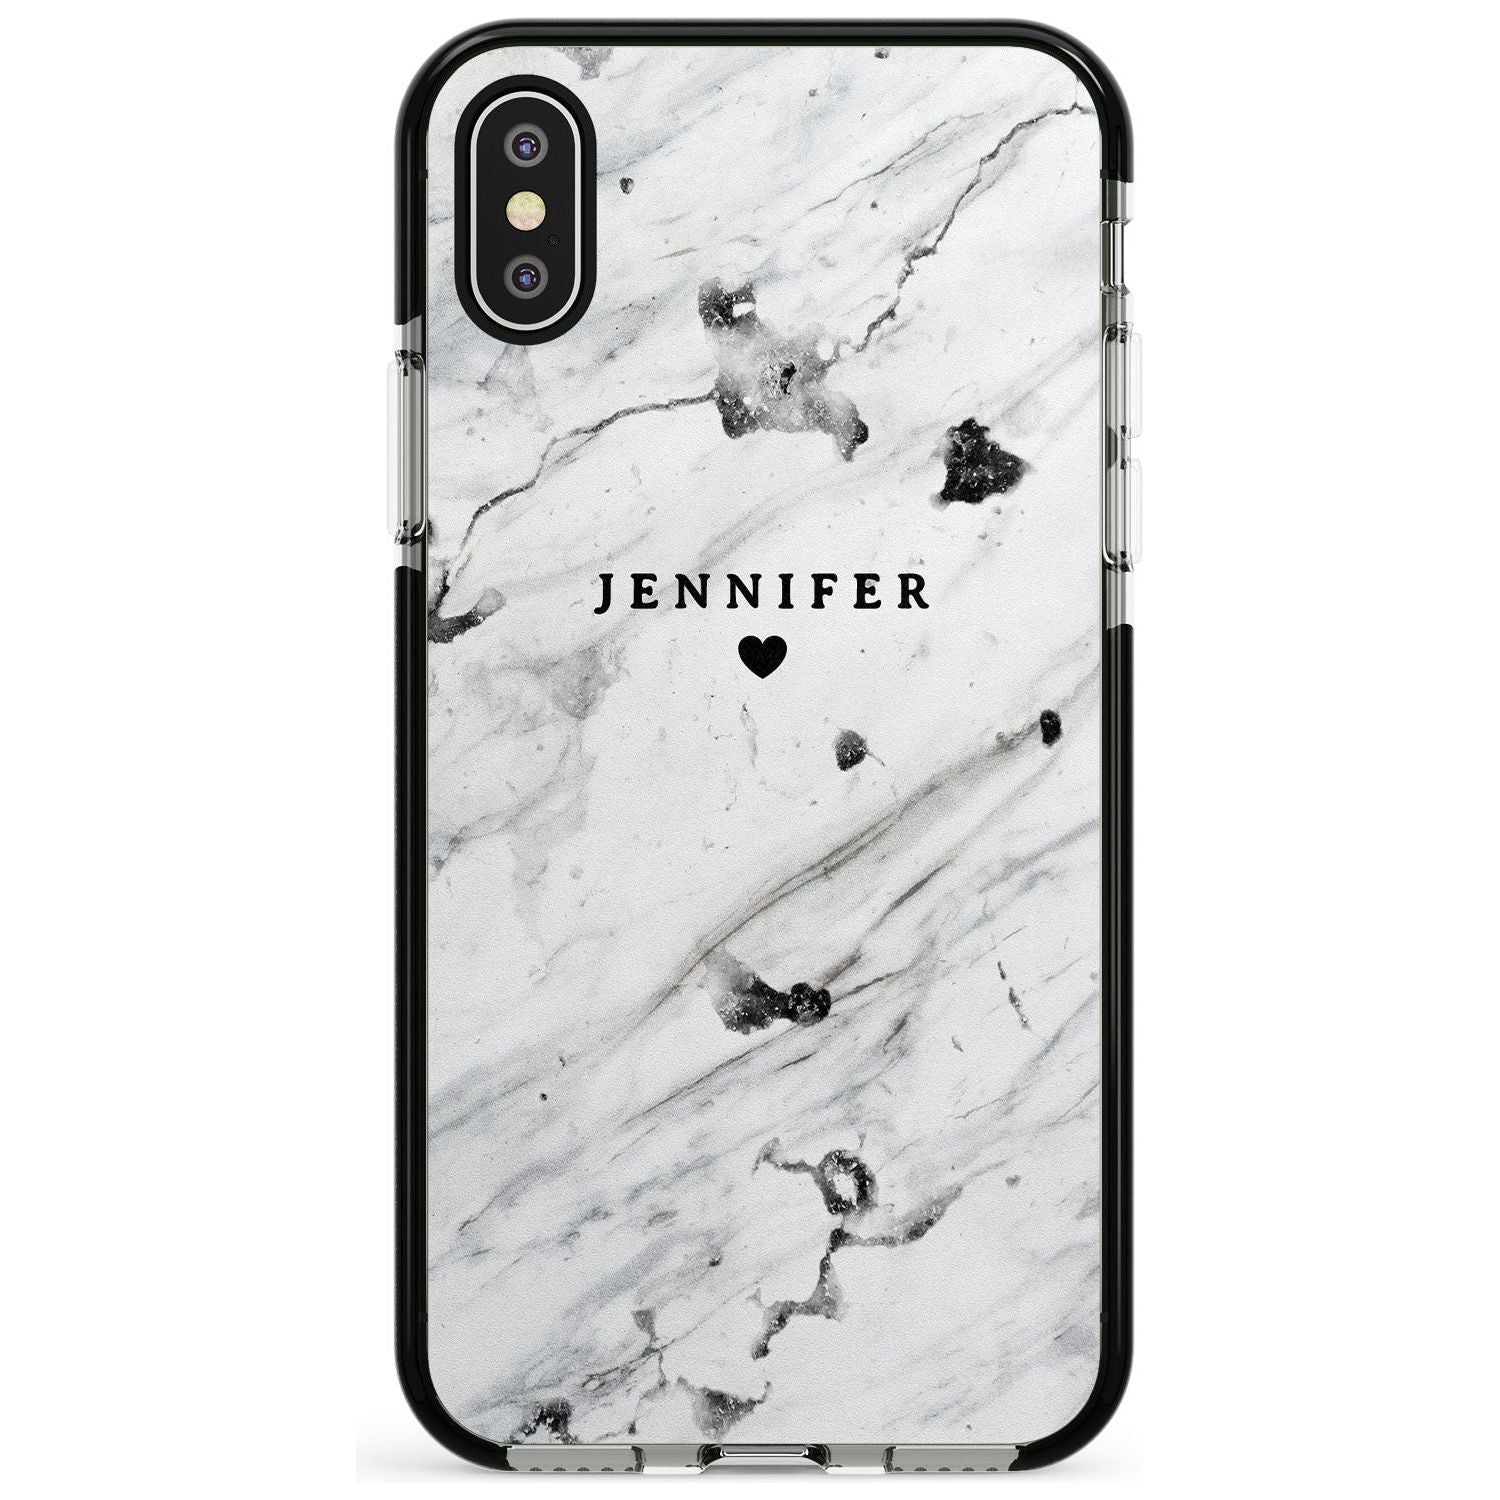 Personalised Black & White Marble Pink Fade Impact Phone Case for iPhone X XS Max XR